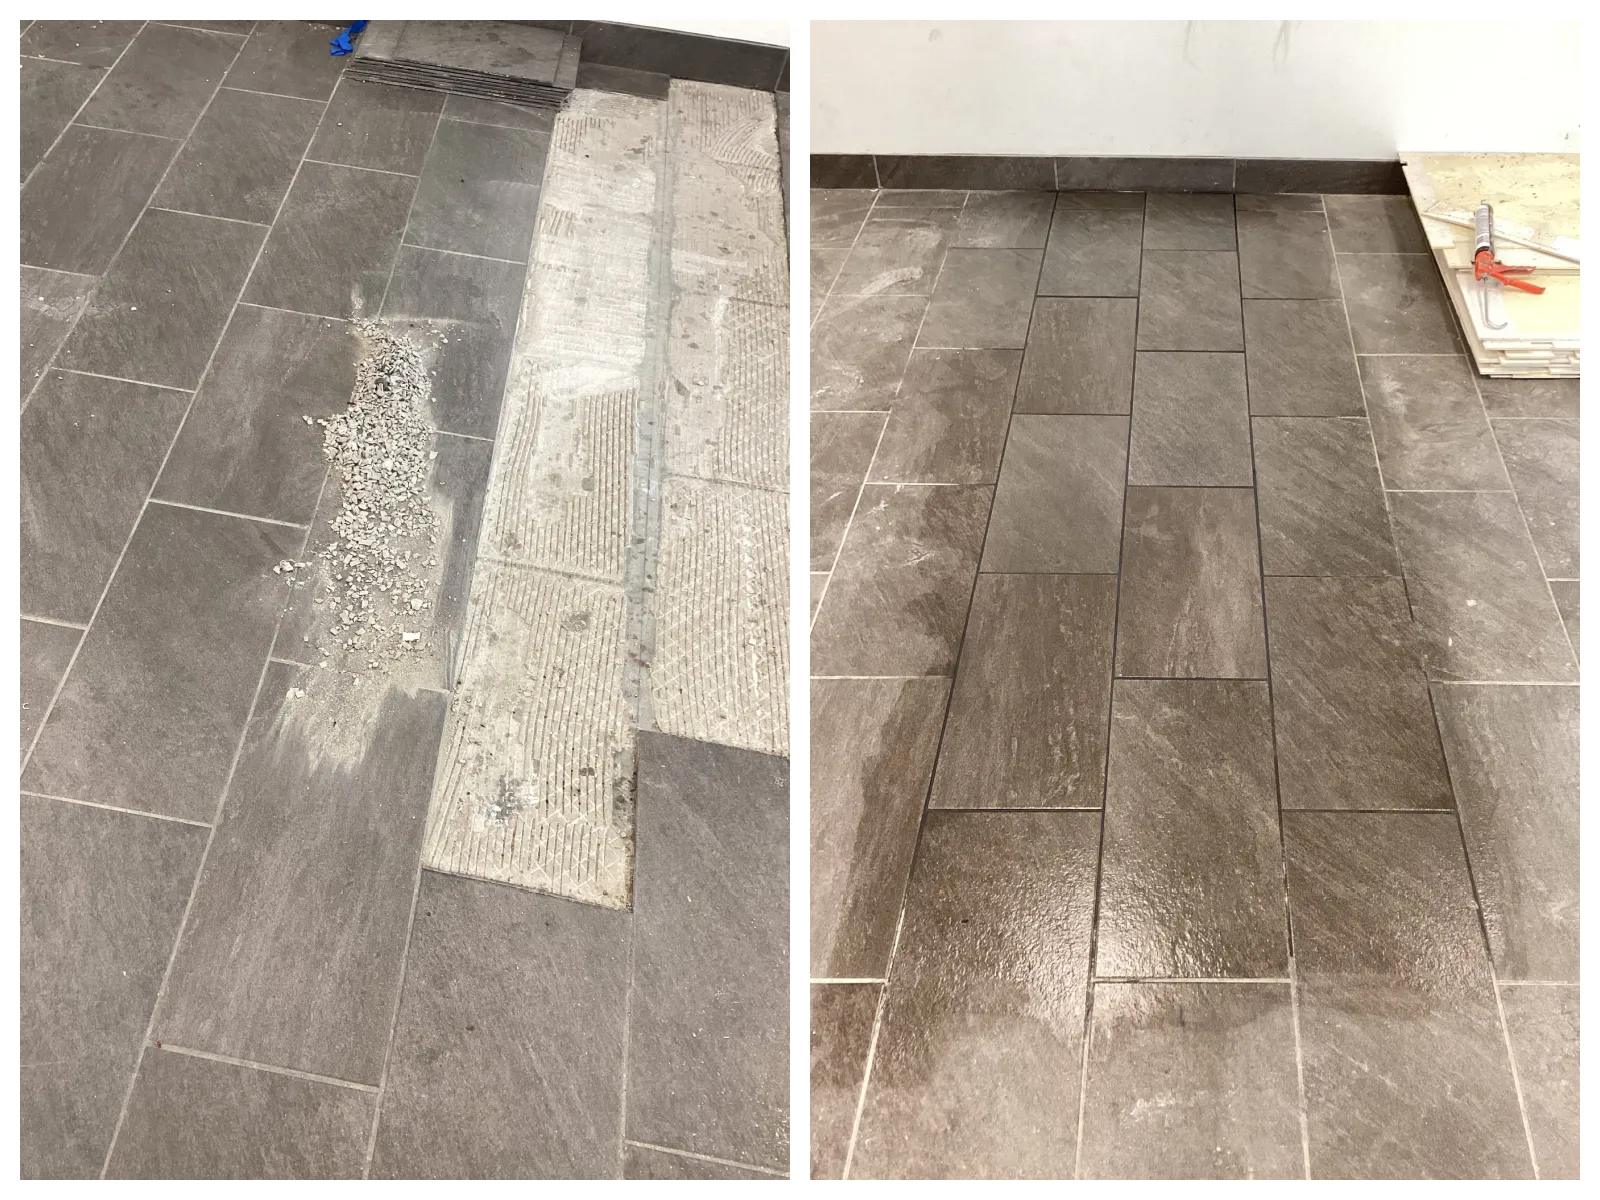 Damage tile sheets have been removed and replaced with matching ones during floor repair in Wheaton, TL